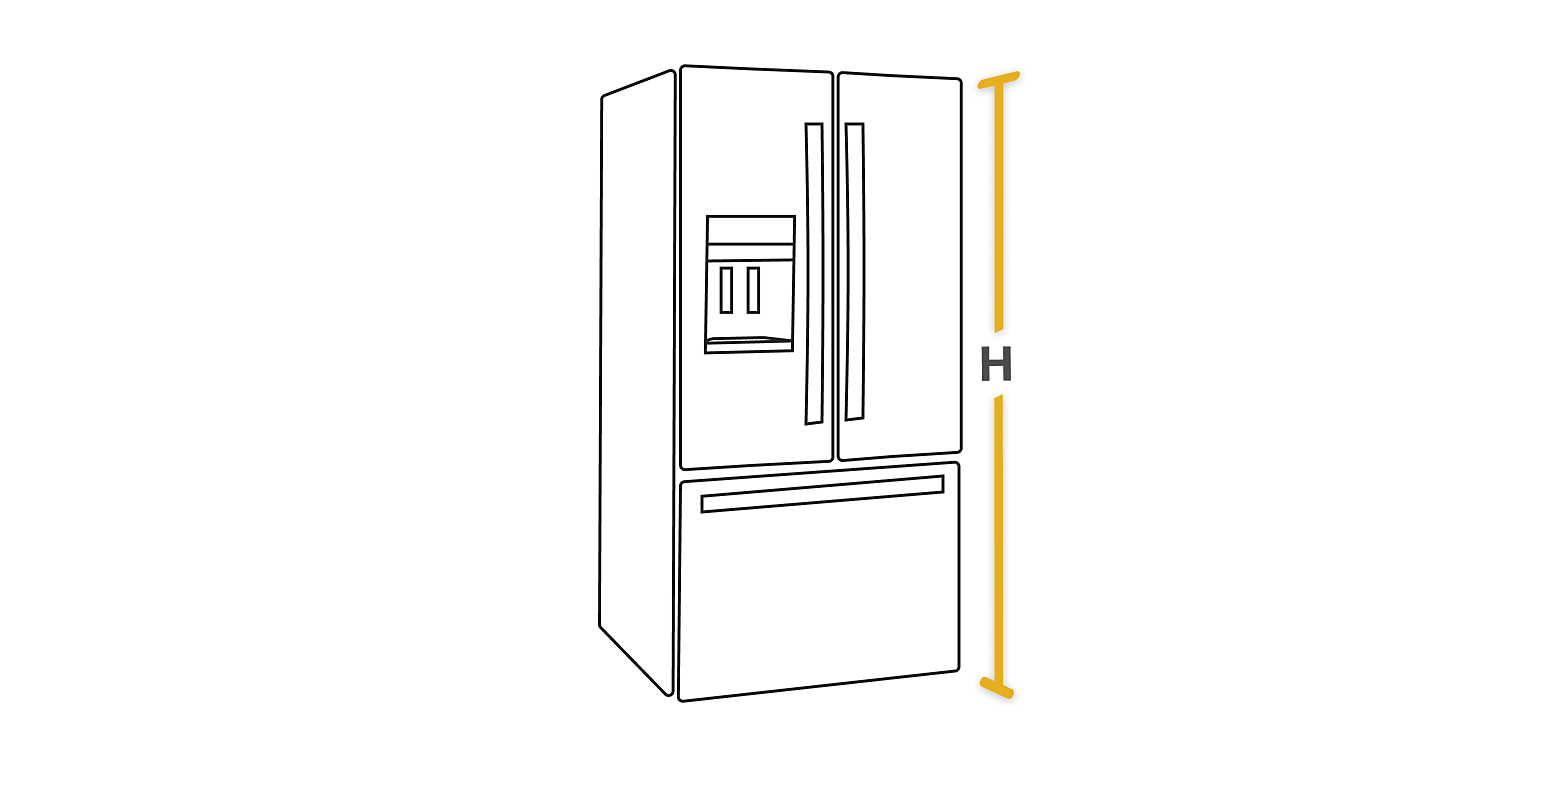 French Door refrigerator with the height diagrammed for measurements